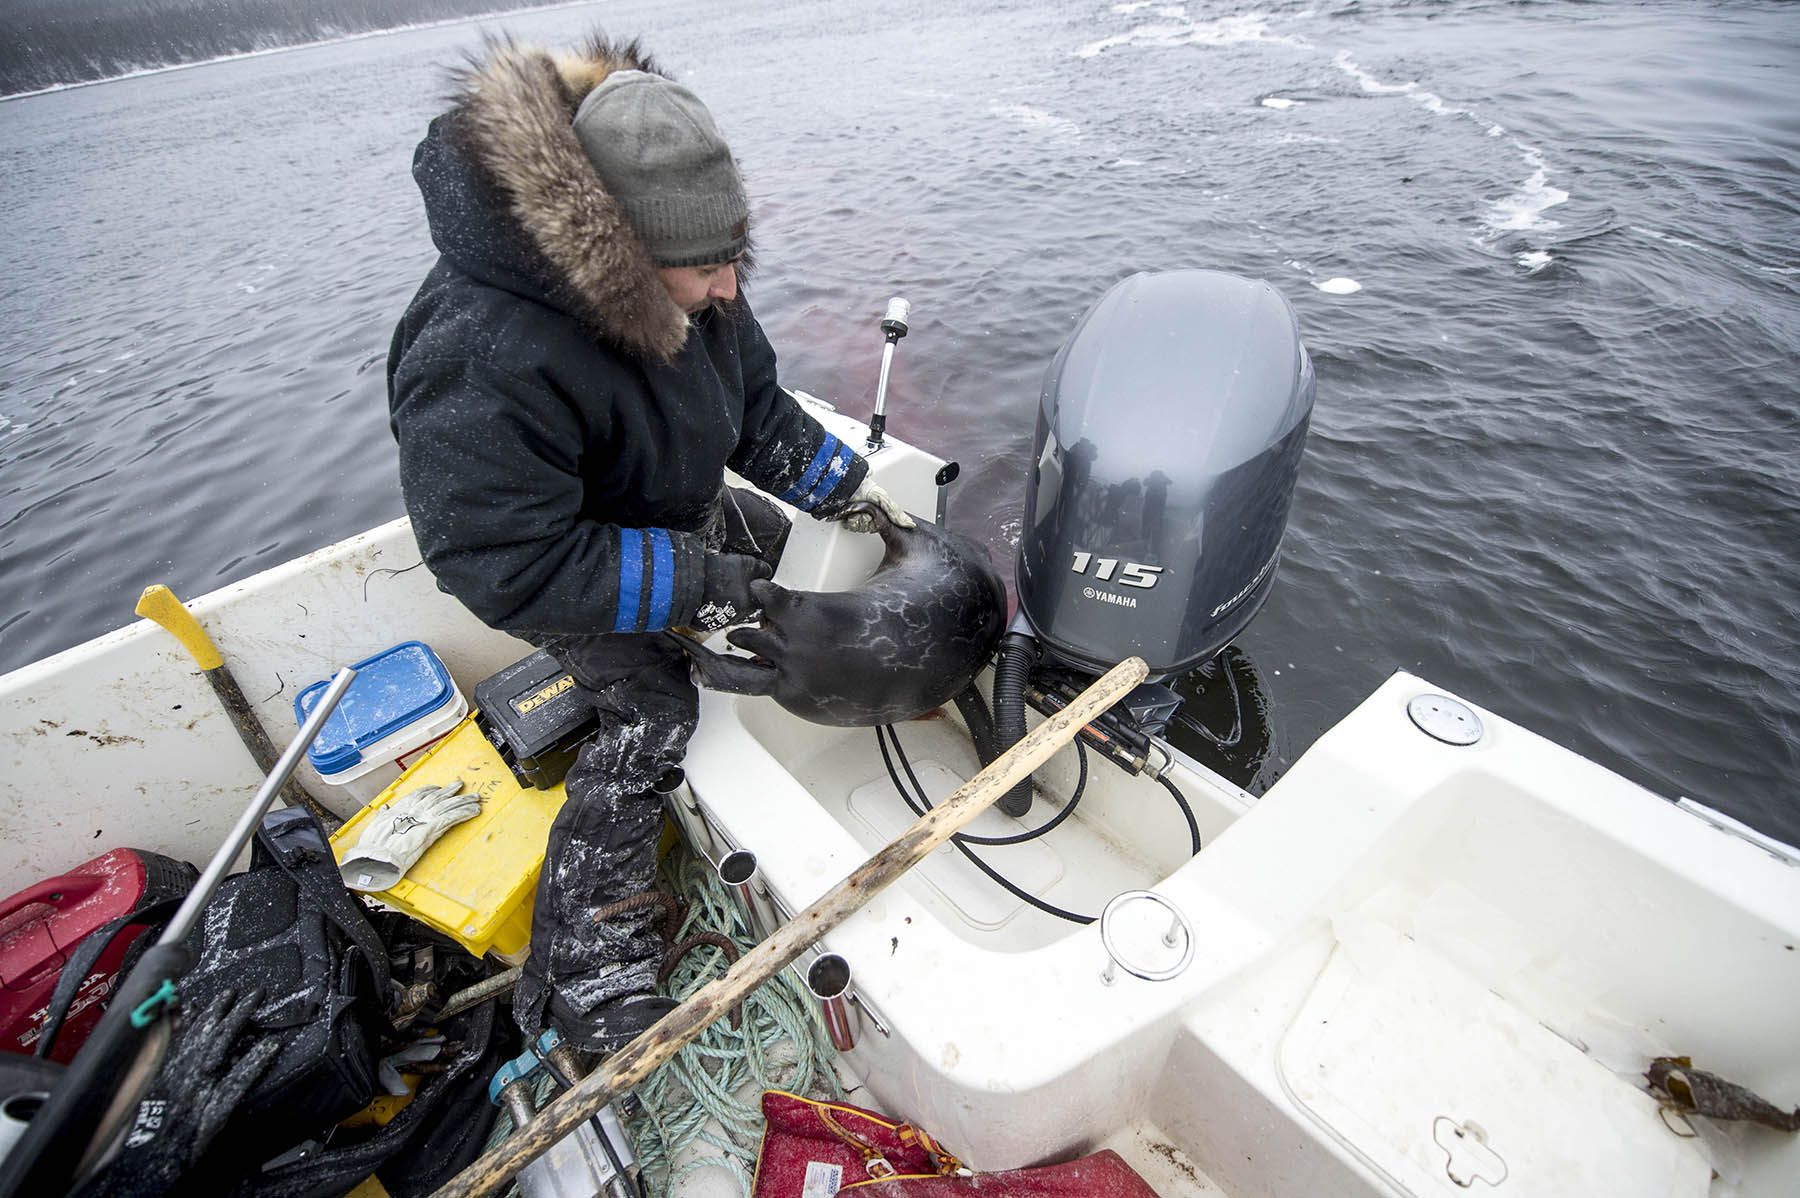 Karl Michelin hauls his jar seal aboard after shooting in Lake Melville. Seal meat is a staple of the Inuit diet as well as an affordable option to feeding the family. Food prices are three times the price as other towns in Labrador. Image by Michael Seamans / The Weather Channel. Canada, 2019.